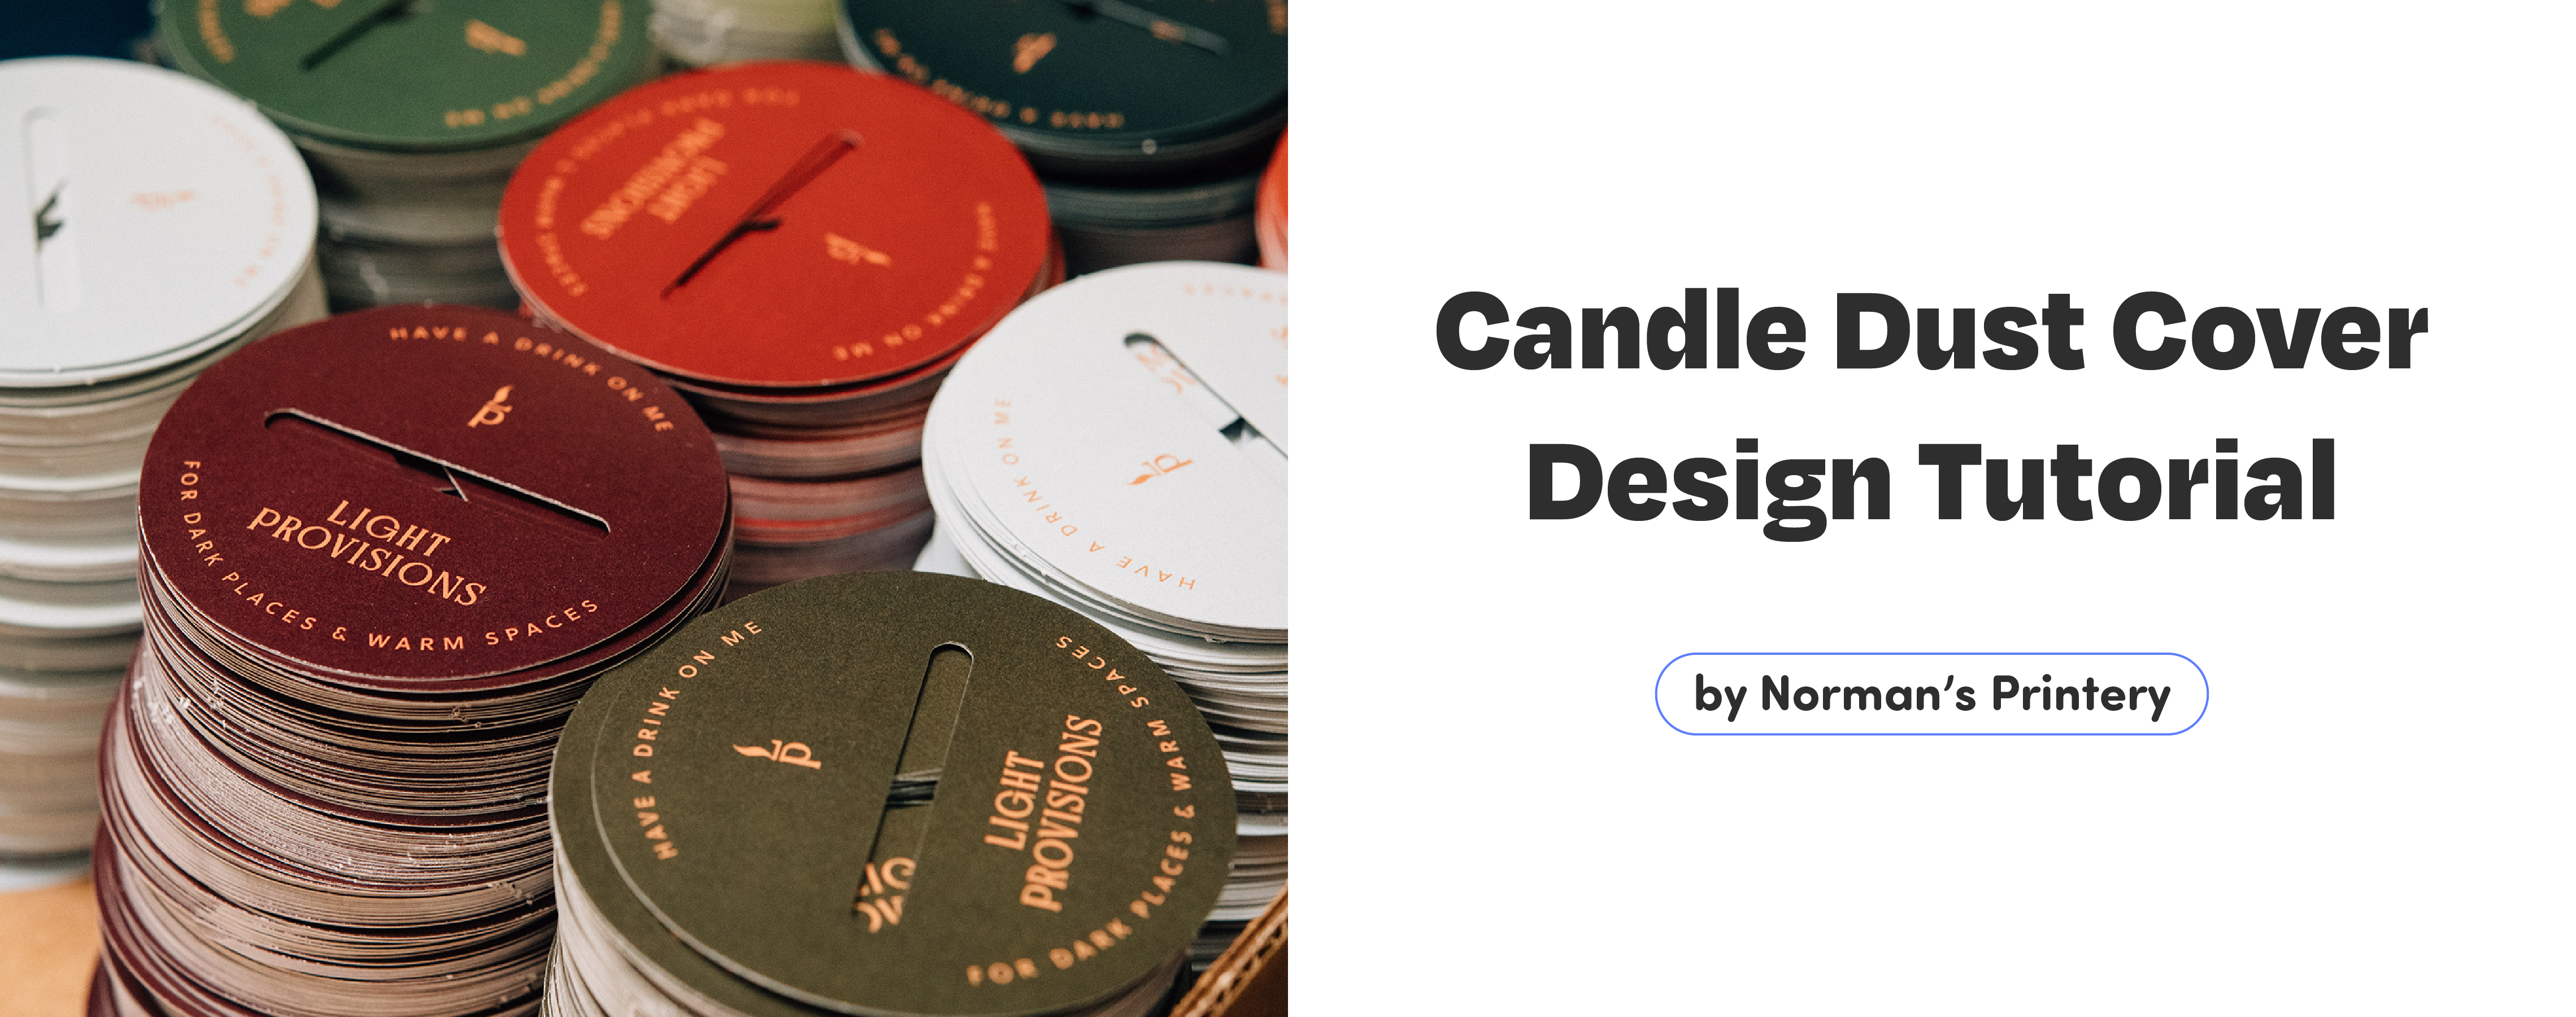 Candle dust cover design tutorial